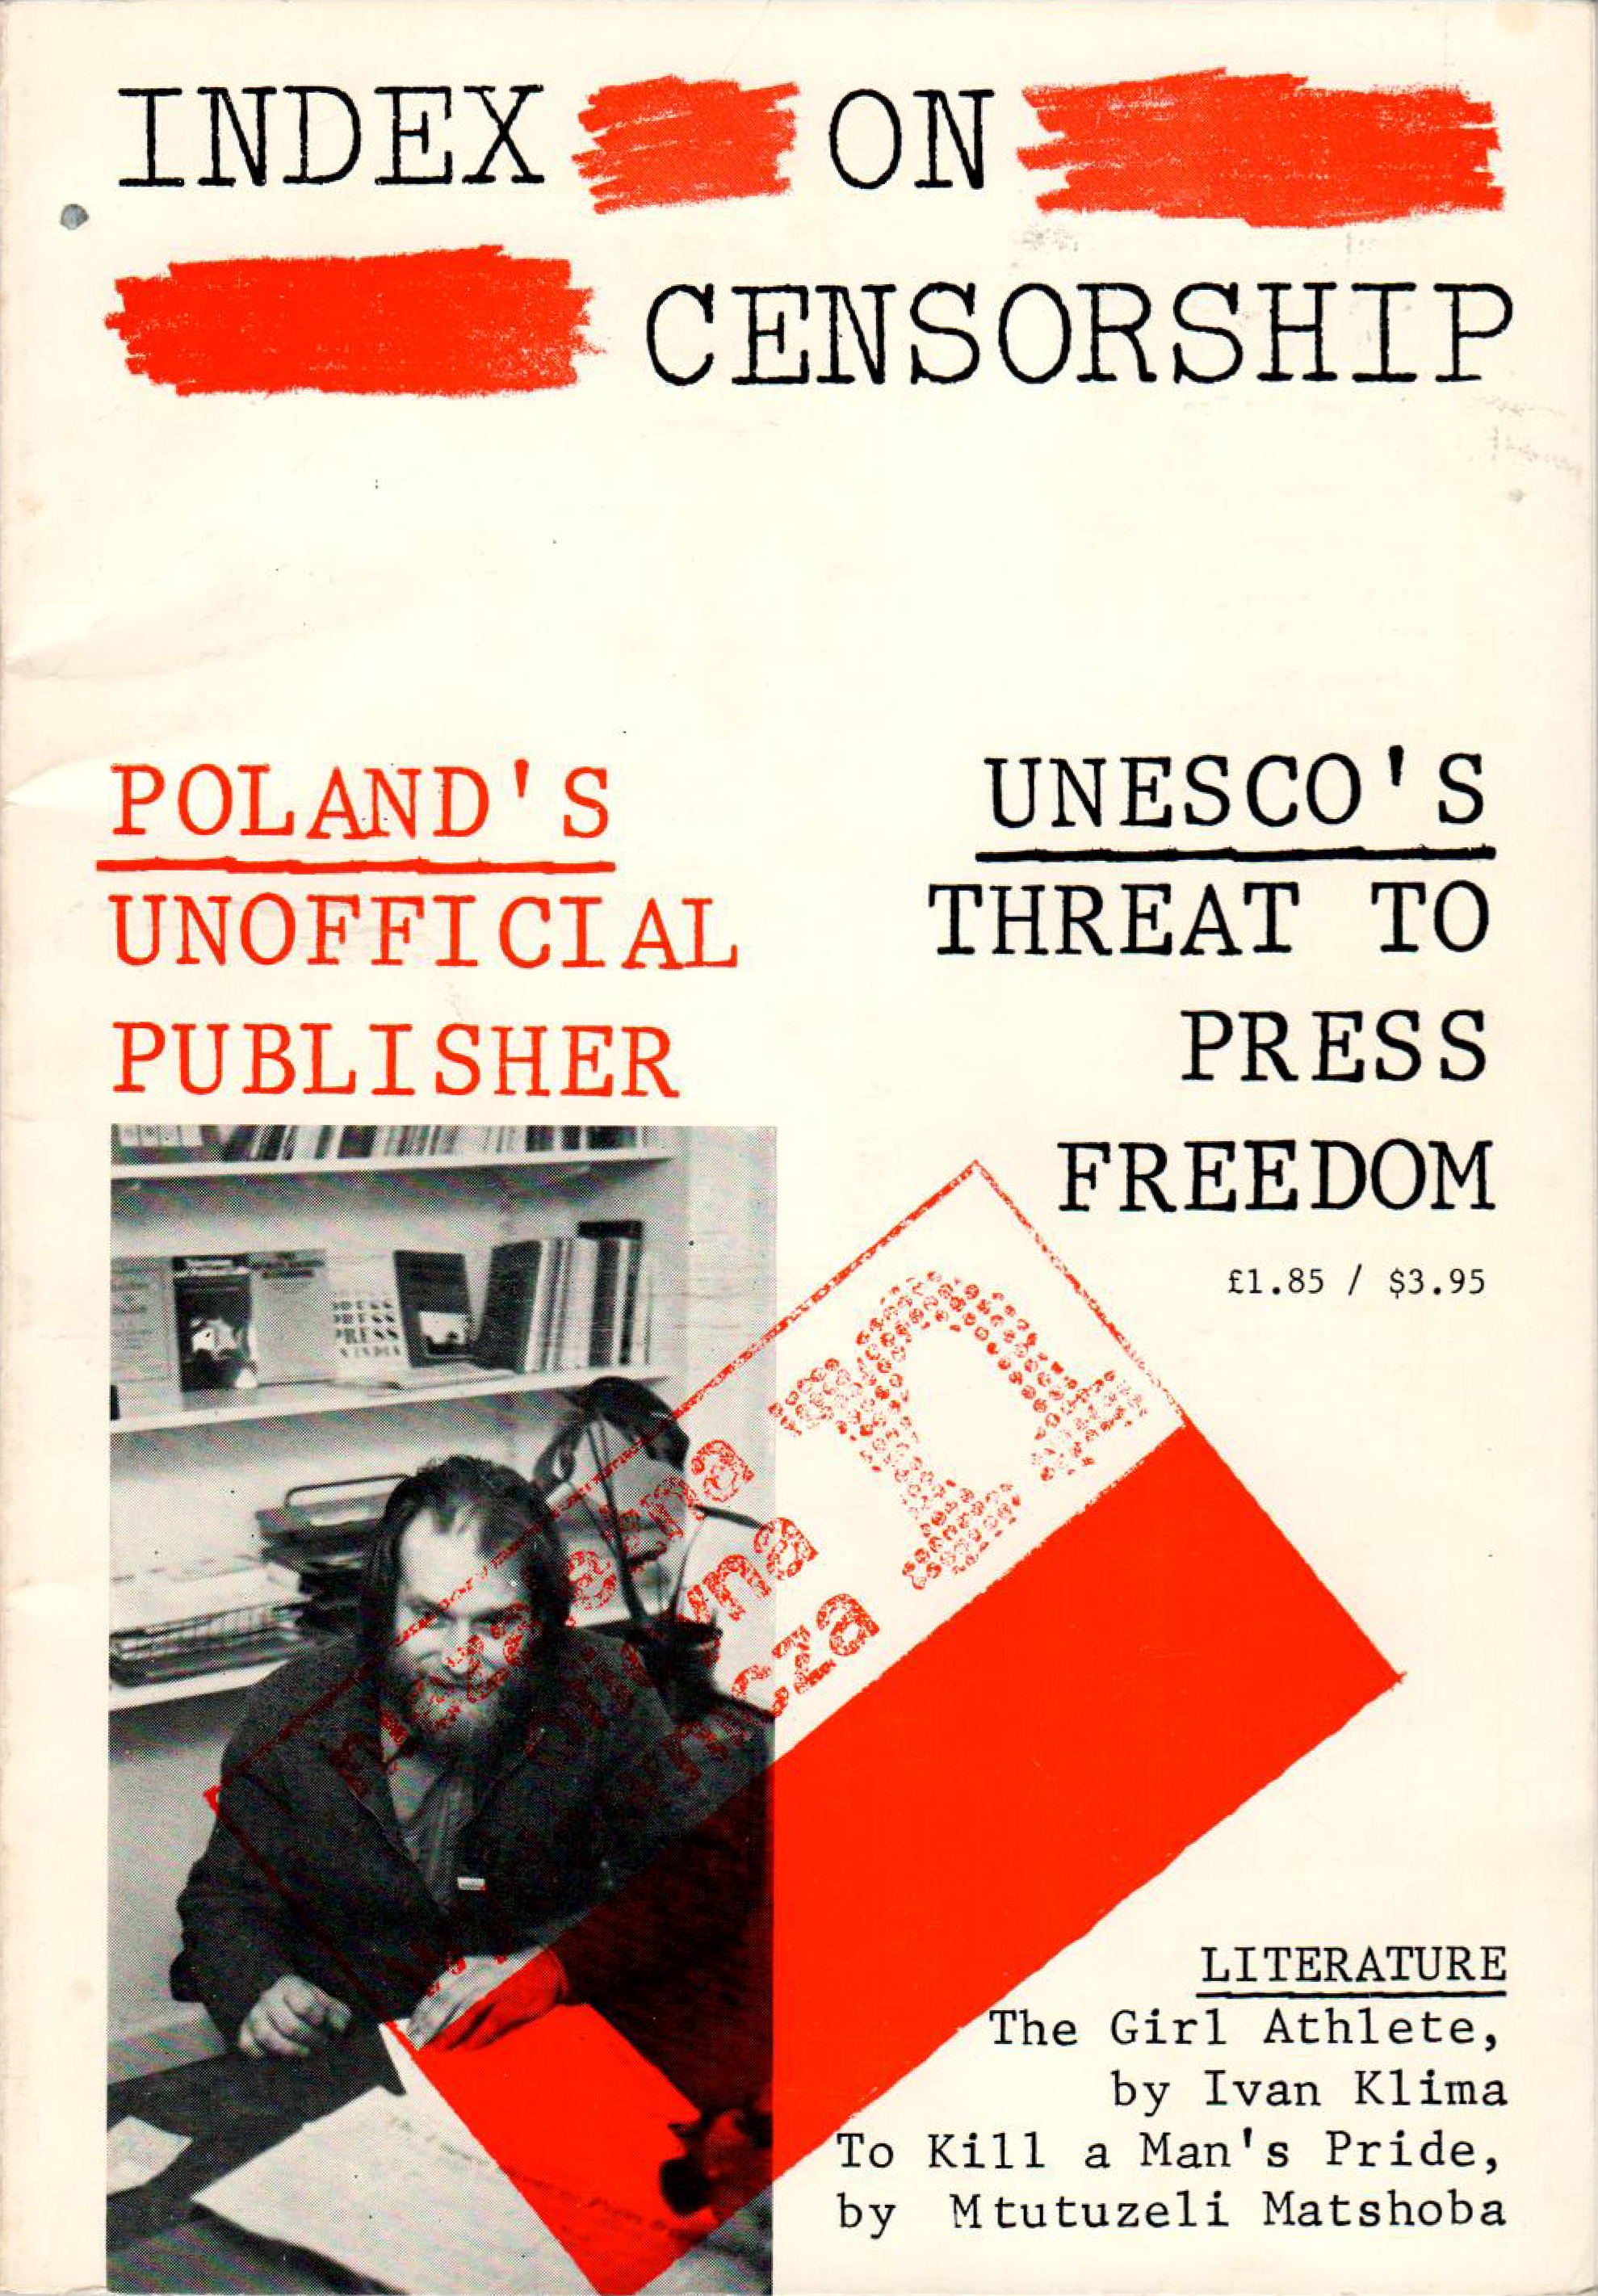 UNESCO's threat to press freedom. the February 1981 issue of Index on Censorship magazine